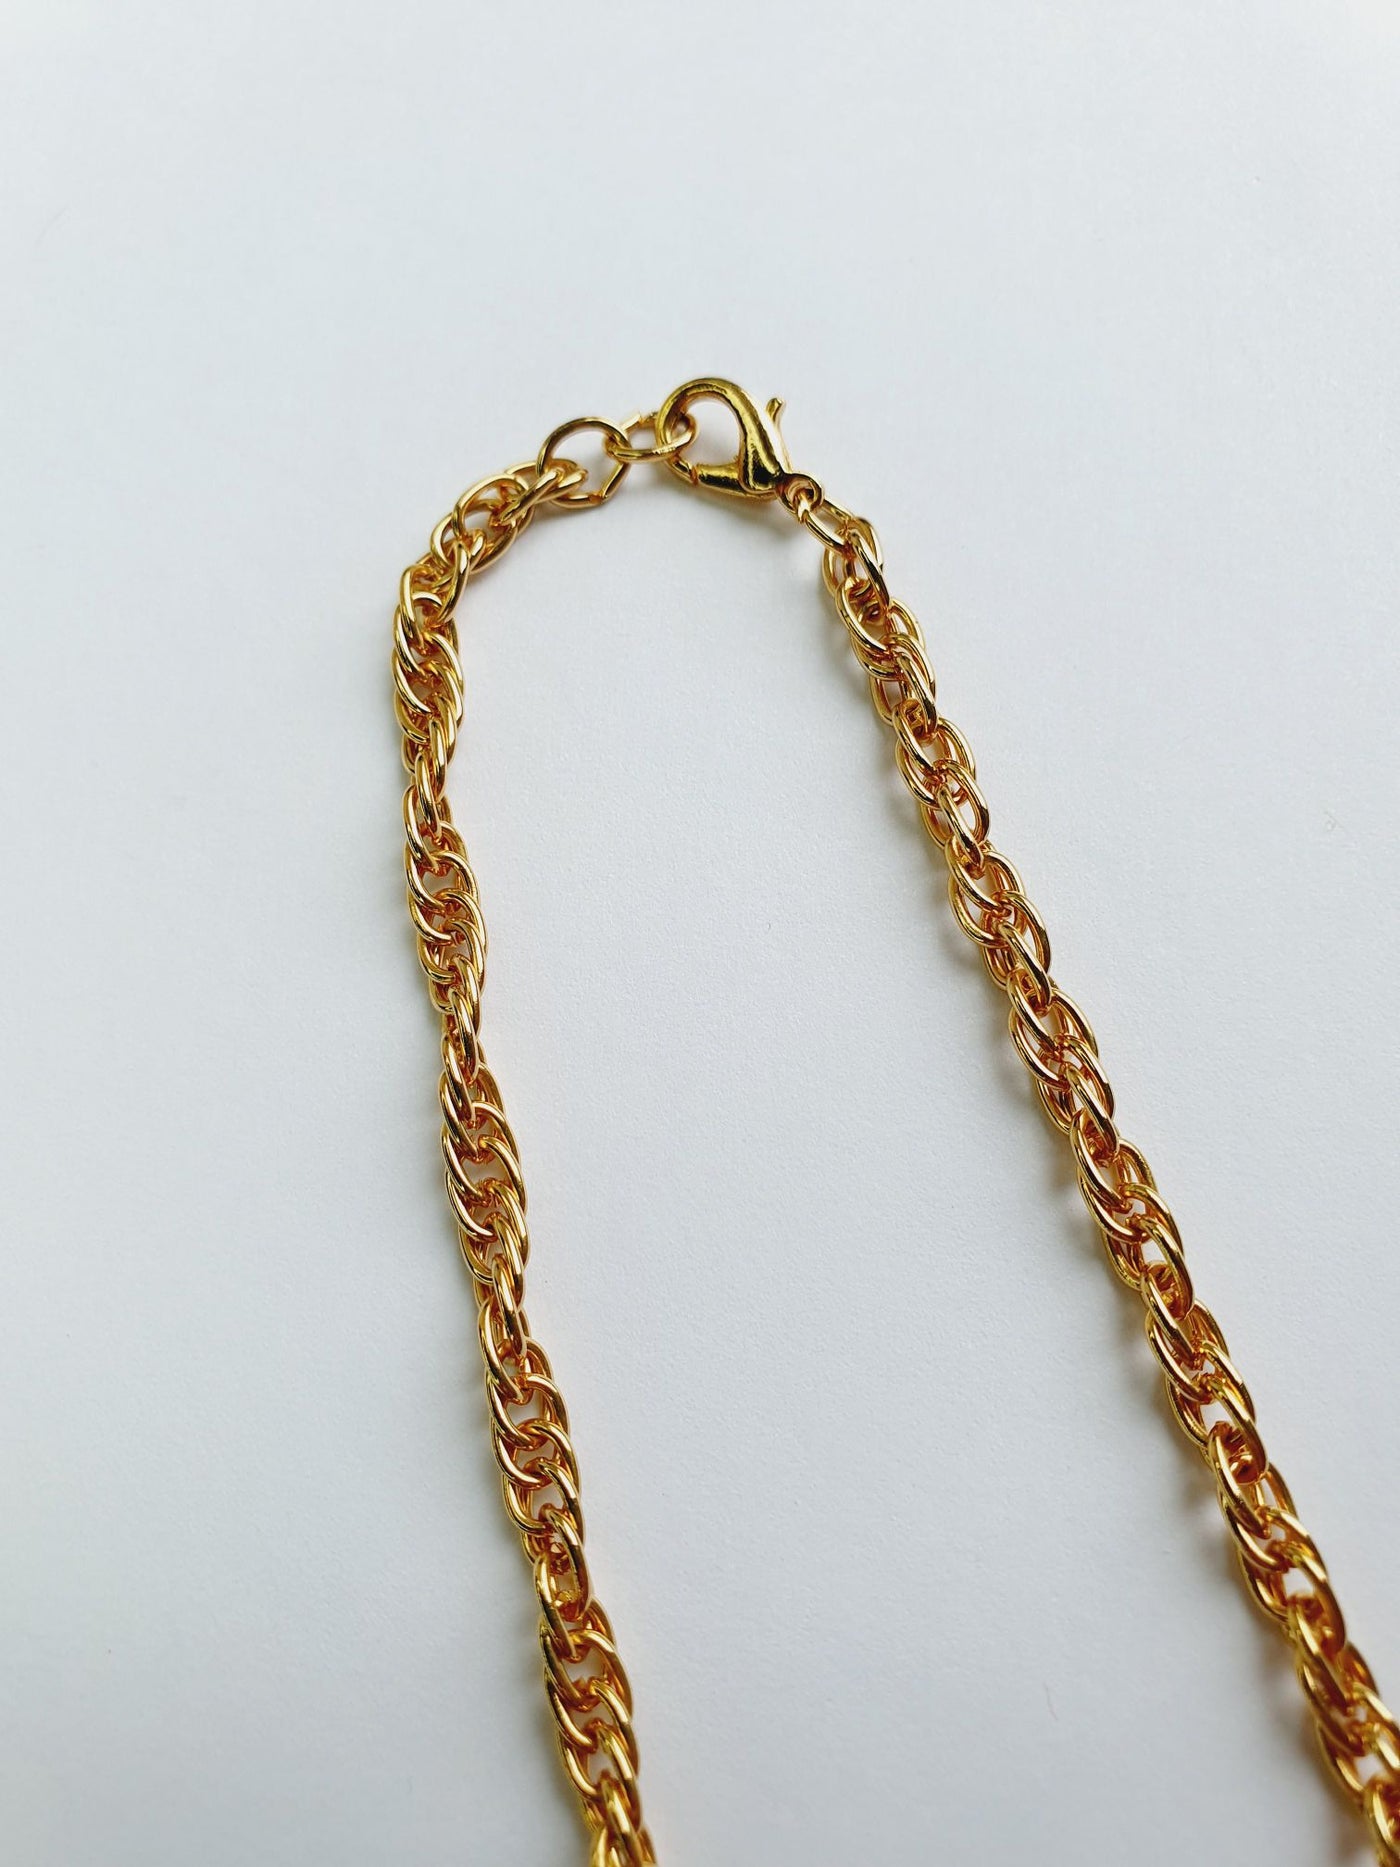 Vintage Gold Plated Wheat Chain Necklace 24"